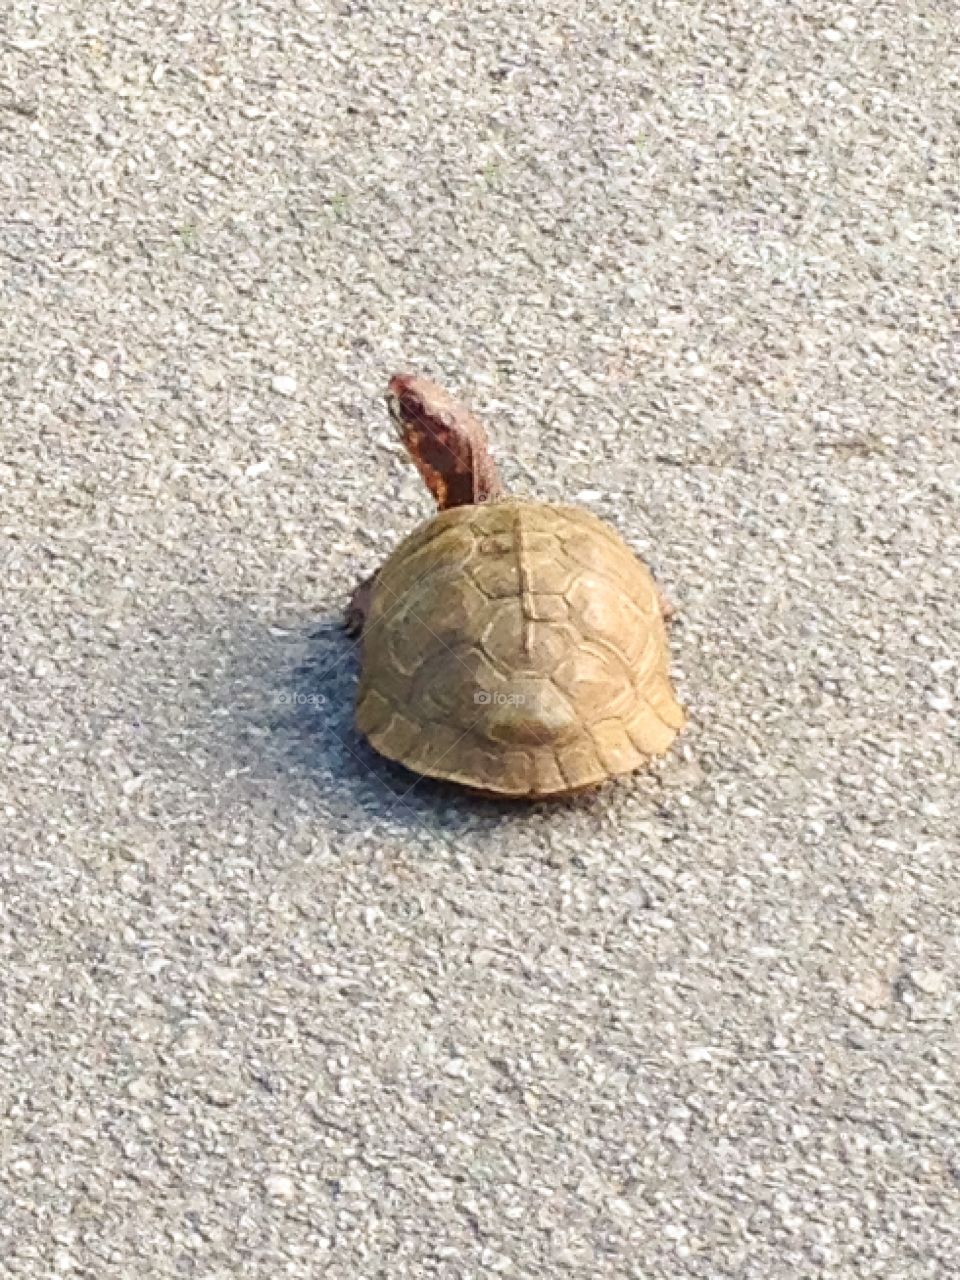 I waited for this little guy to cross in front of me on the way to work.